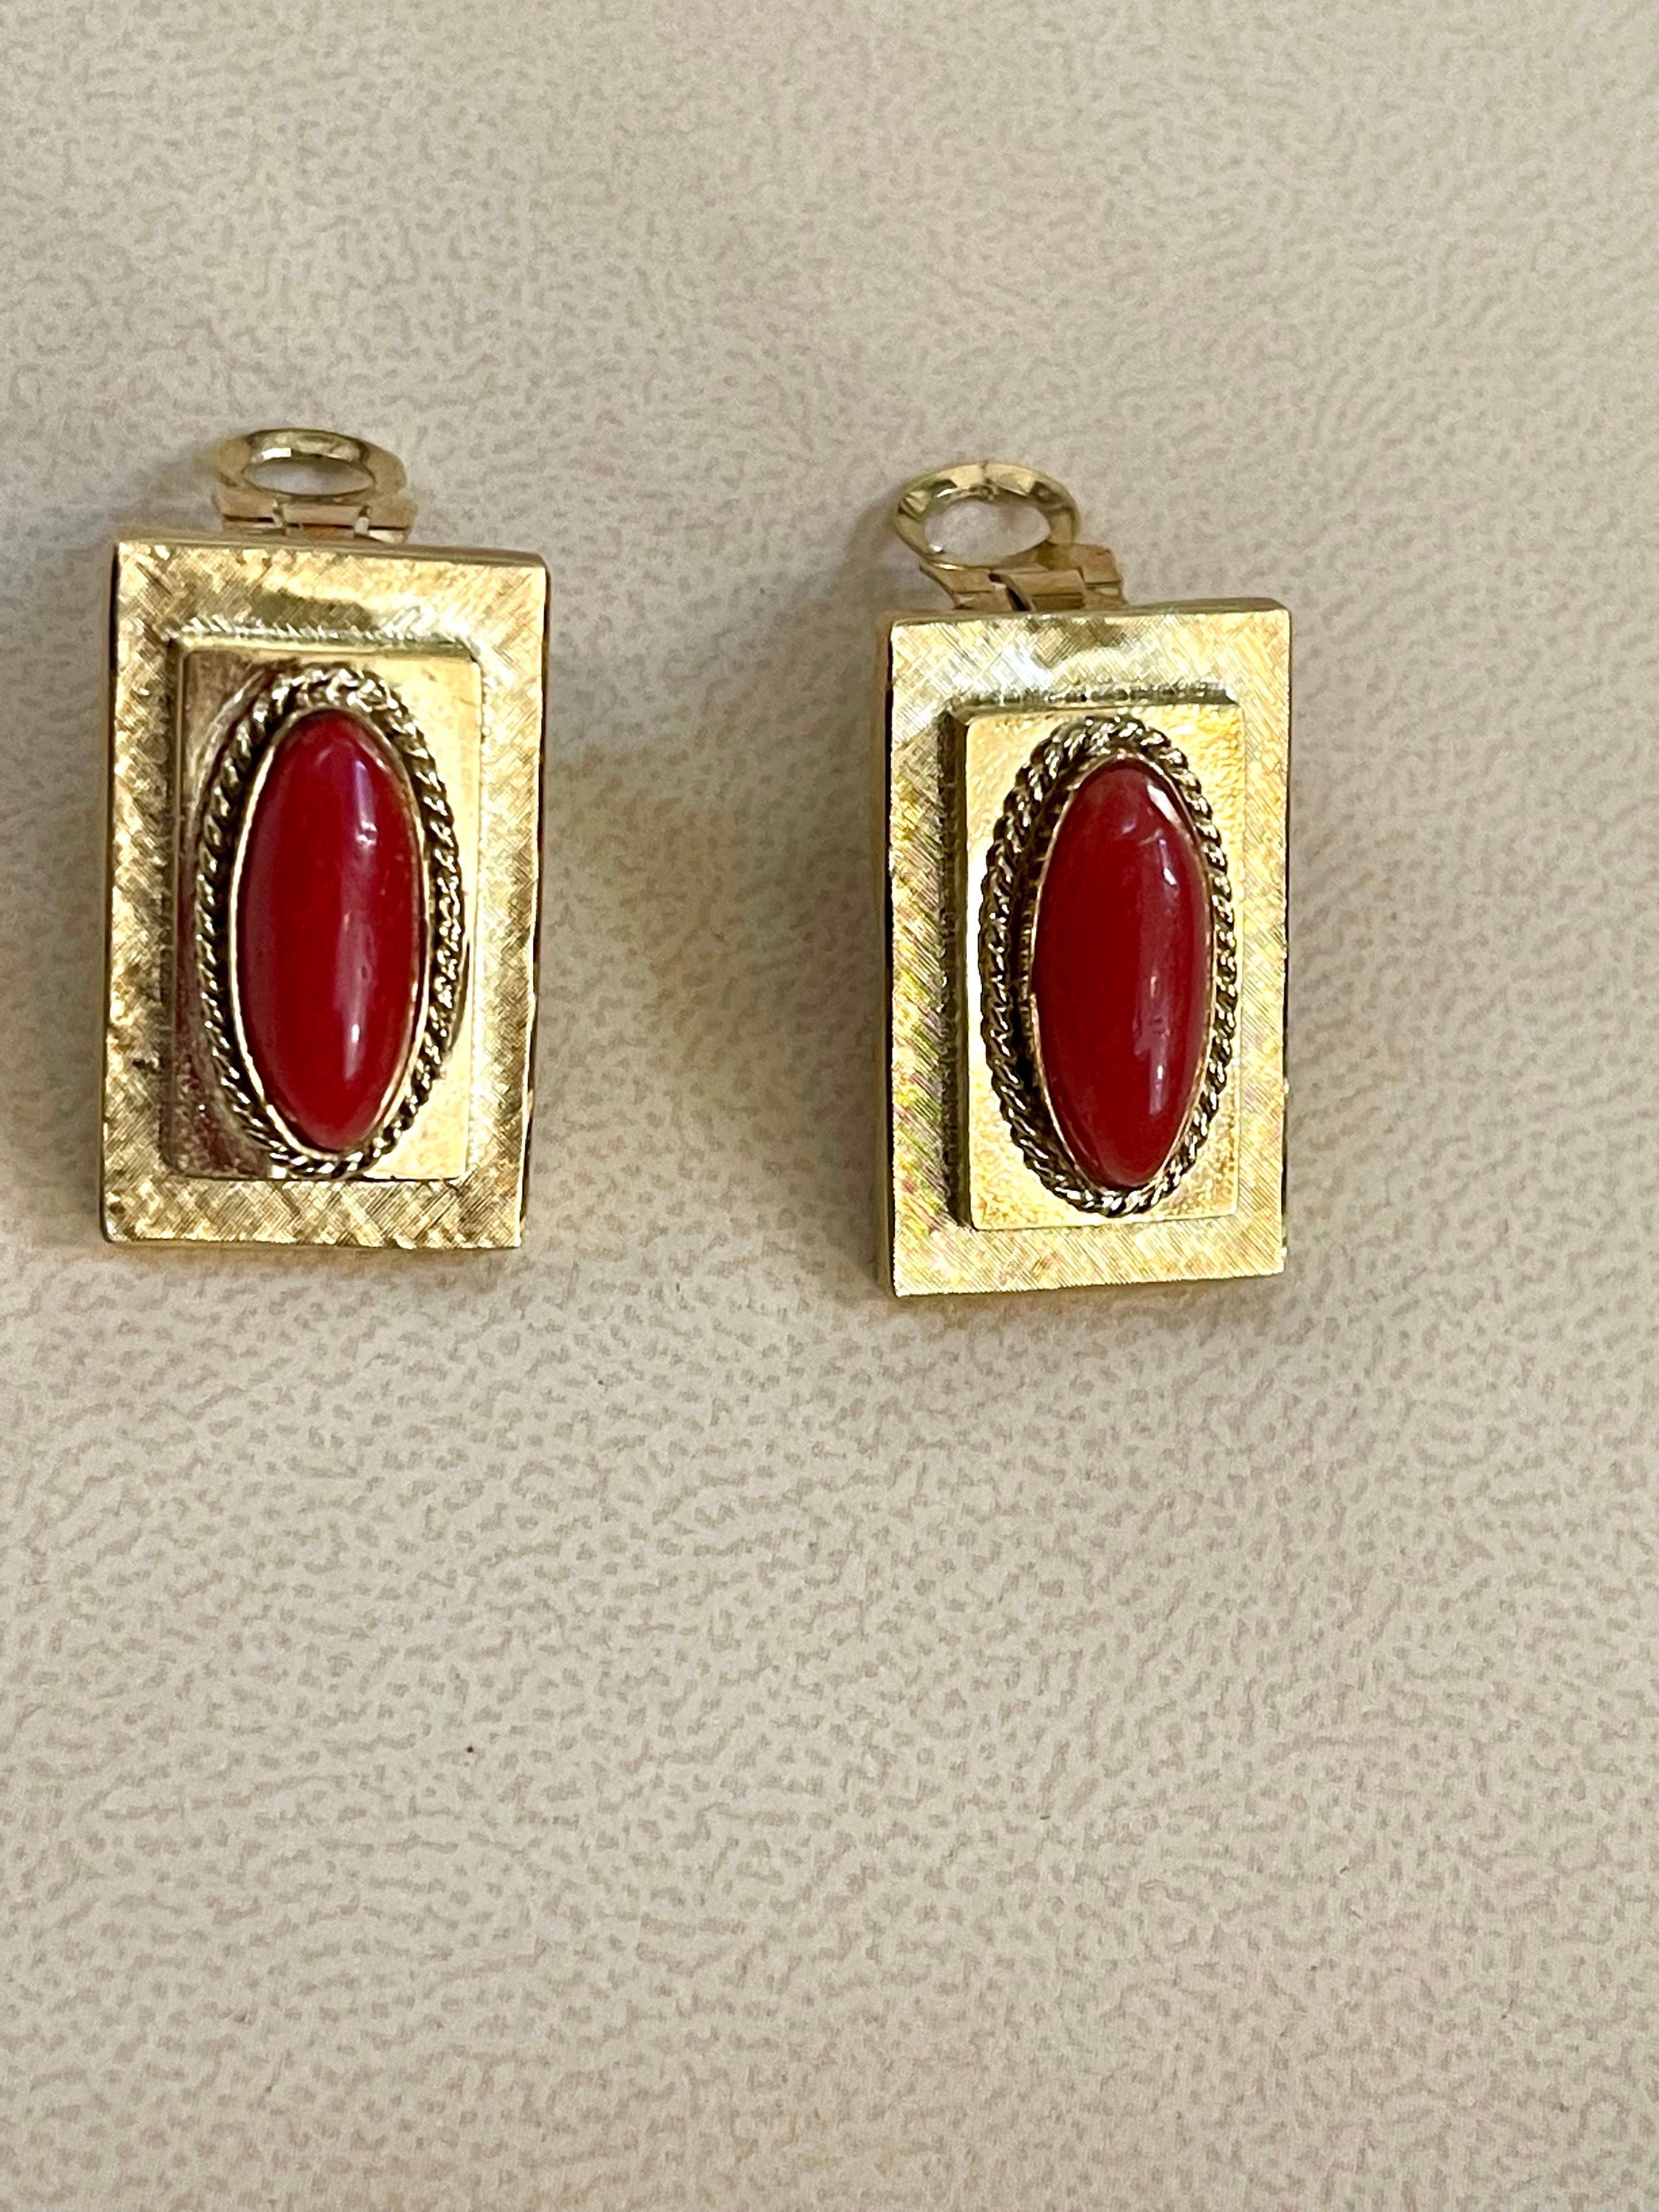 9 Ct Natural Red Coral Large Stud Earring in 18 Karat Yellow Gold, Clip on 3